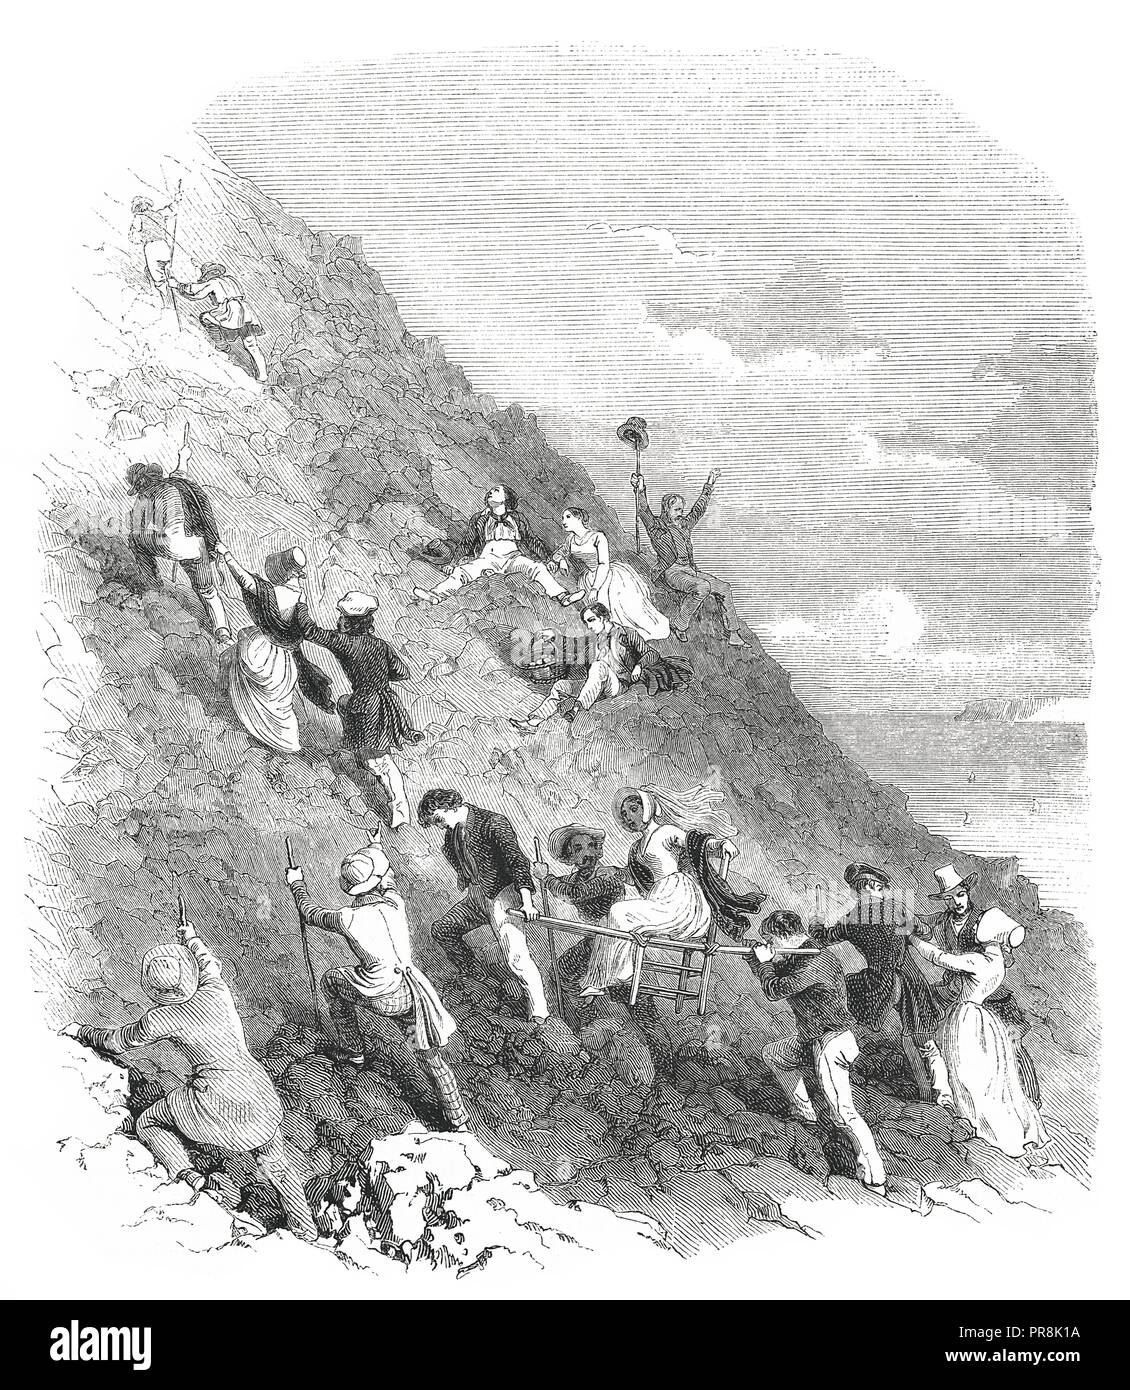 19th century illustration of walk to mount Vesuvius. Original artwork published in Le magasin Pittoresque by M. A. Lachevardiere, Paris, 1846. Stock Photo